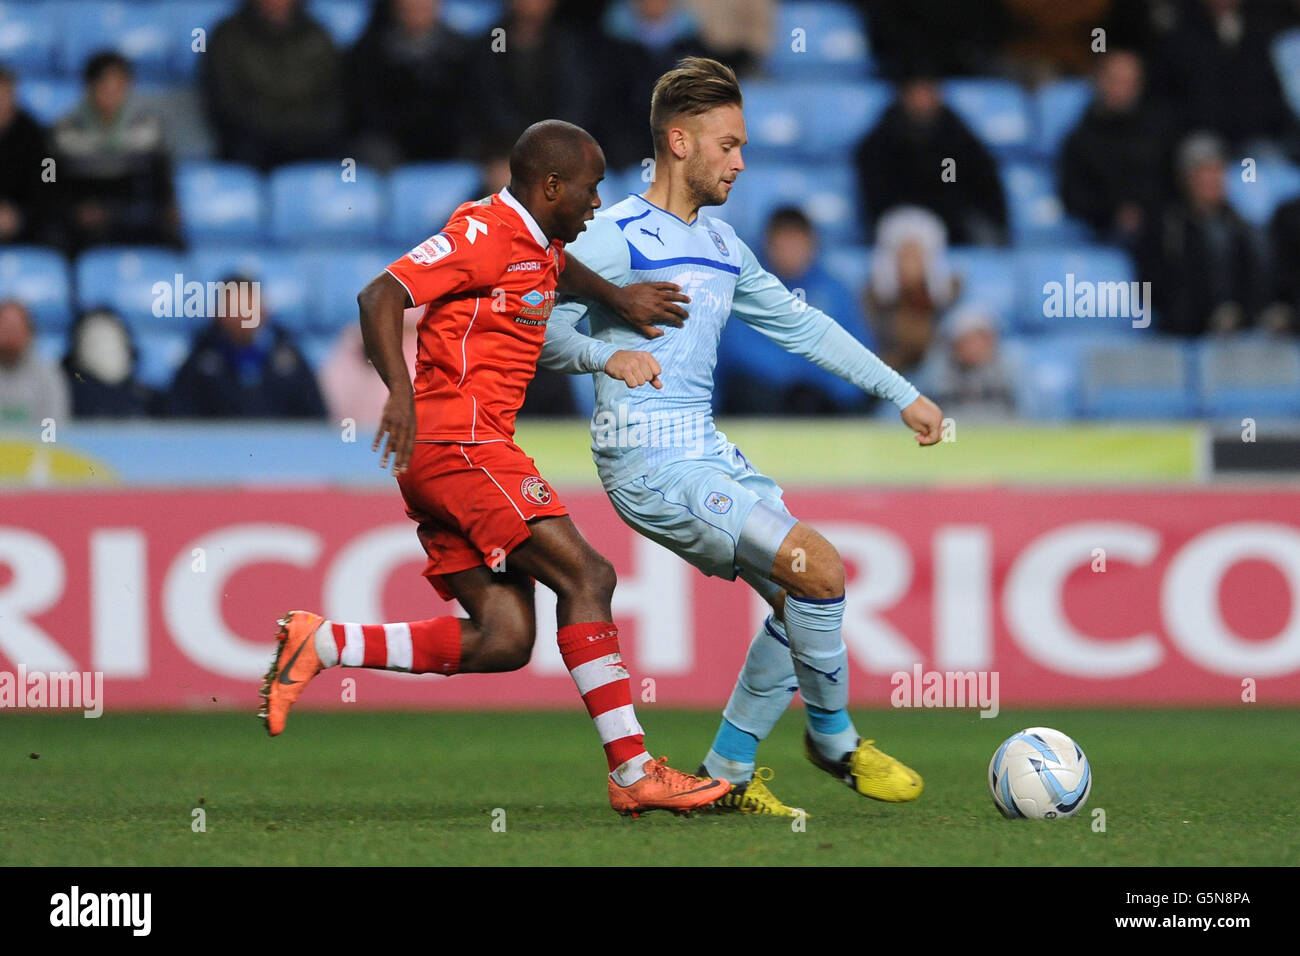 Coventry City's James Bailey and Walsall's Fabian Brandy battle for the ball during the npower Football League One match at the Ricoh Arena, Coventry. Stock Photo